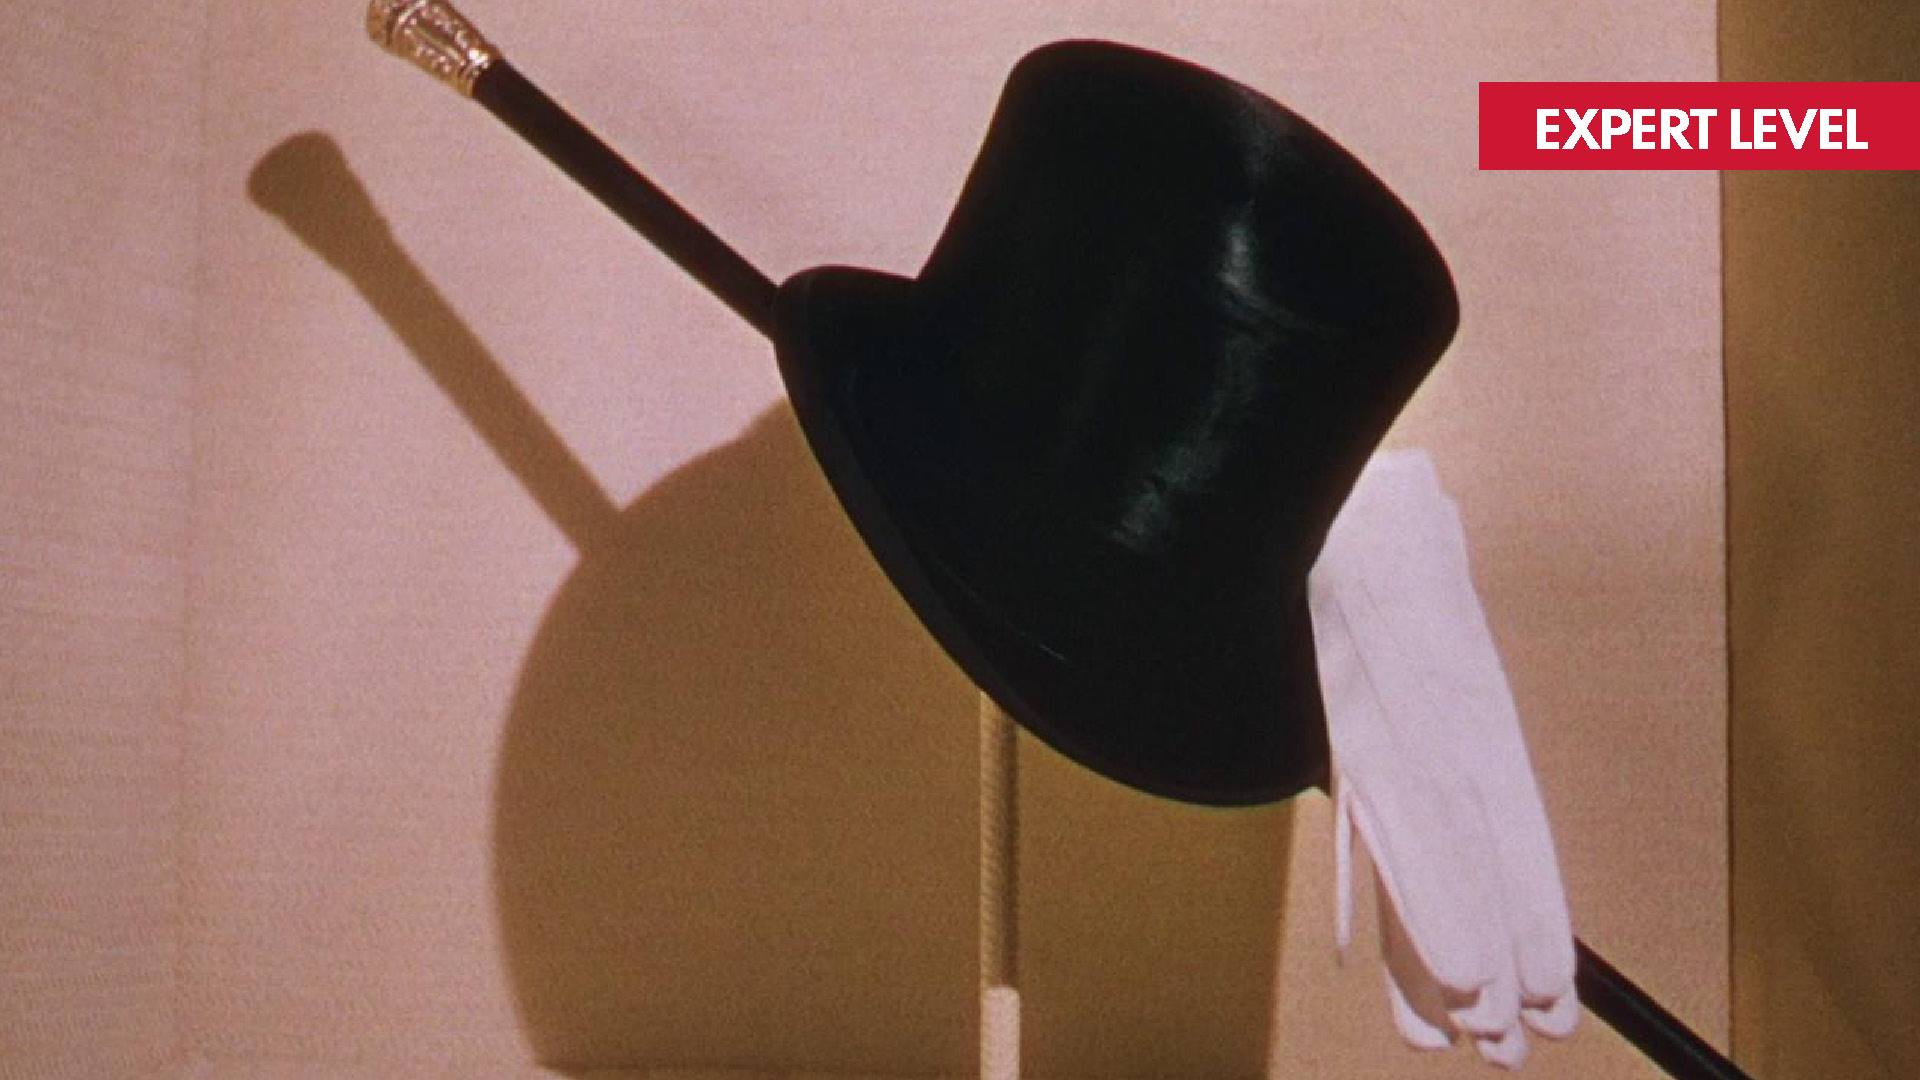 THE BAND WAGON film still of a walking cane, black top hat, and white gloves